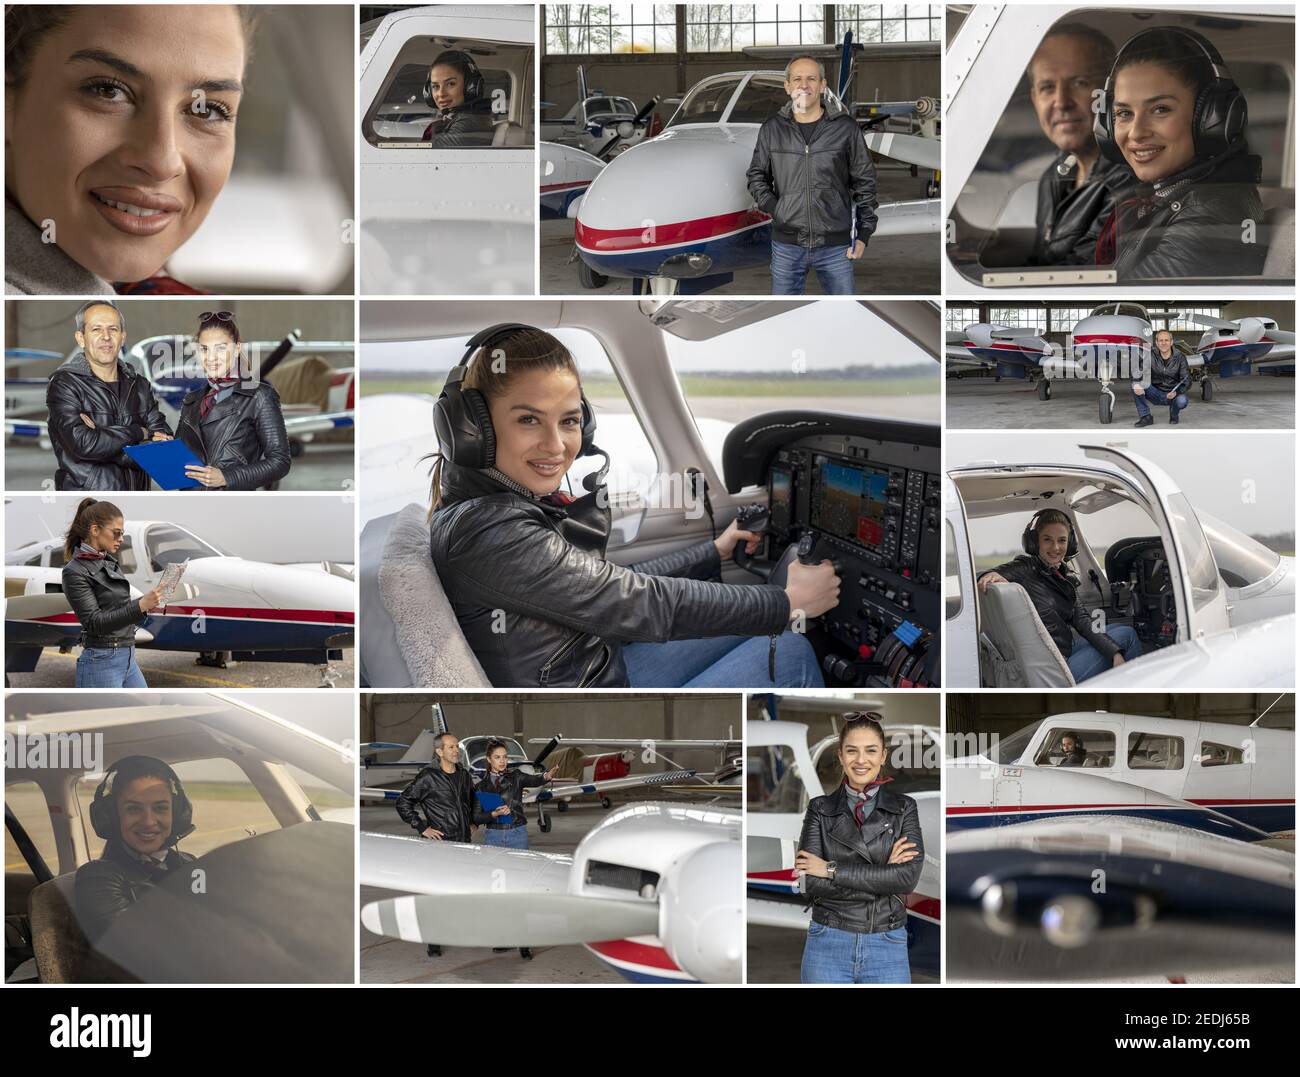 Flight School -Woman in Aviation- Gender Equality at Work. Collage of Photographs Showing Smiling Female Pilot and Flight Instructor in Flight School. Stock Photo